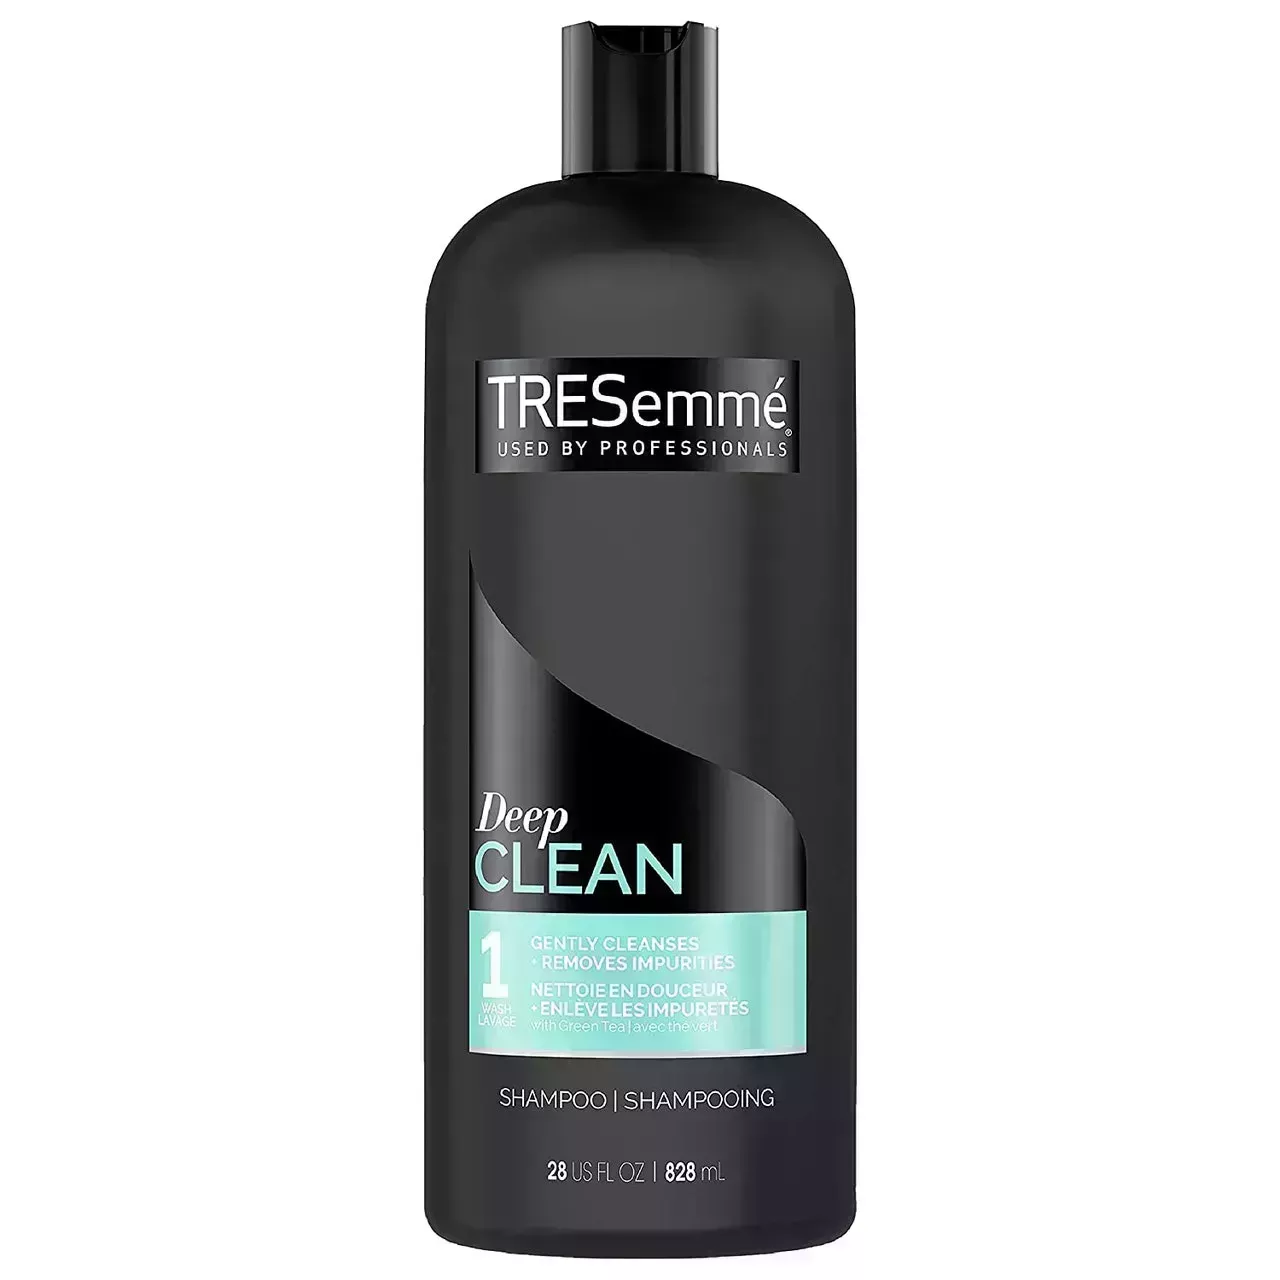 bottle of tresemme deep clean shampoo on a white background